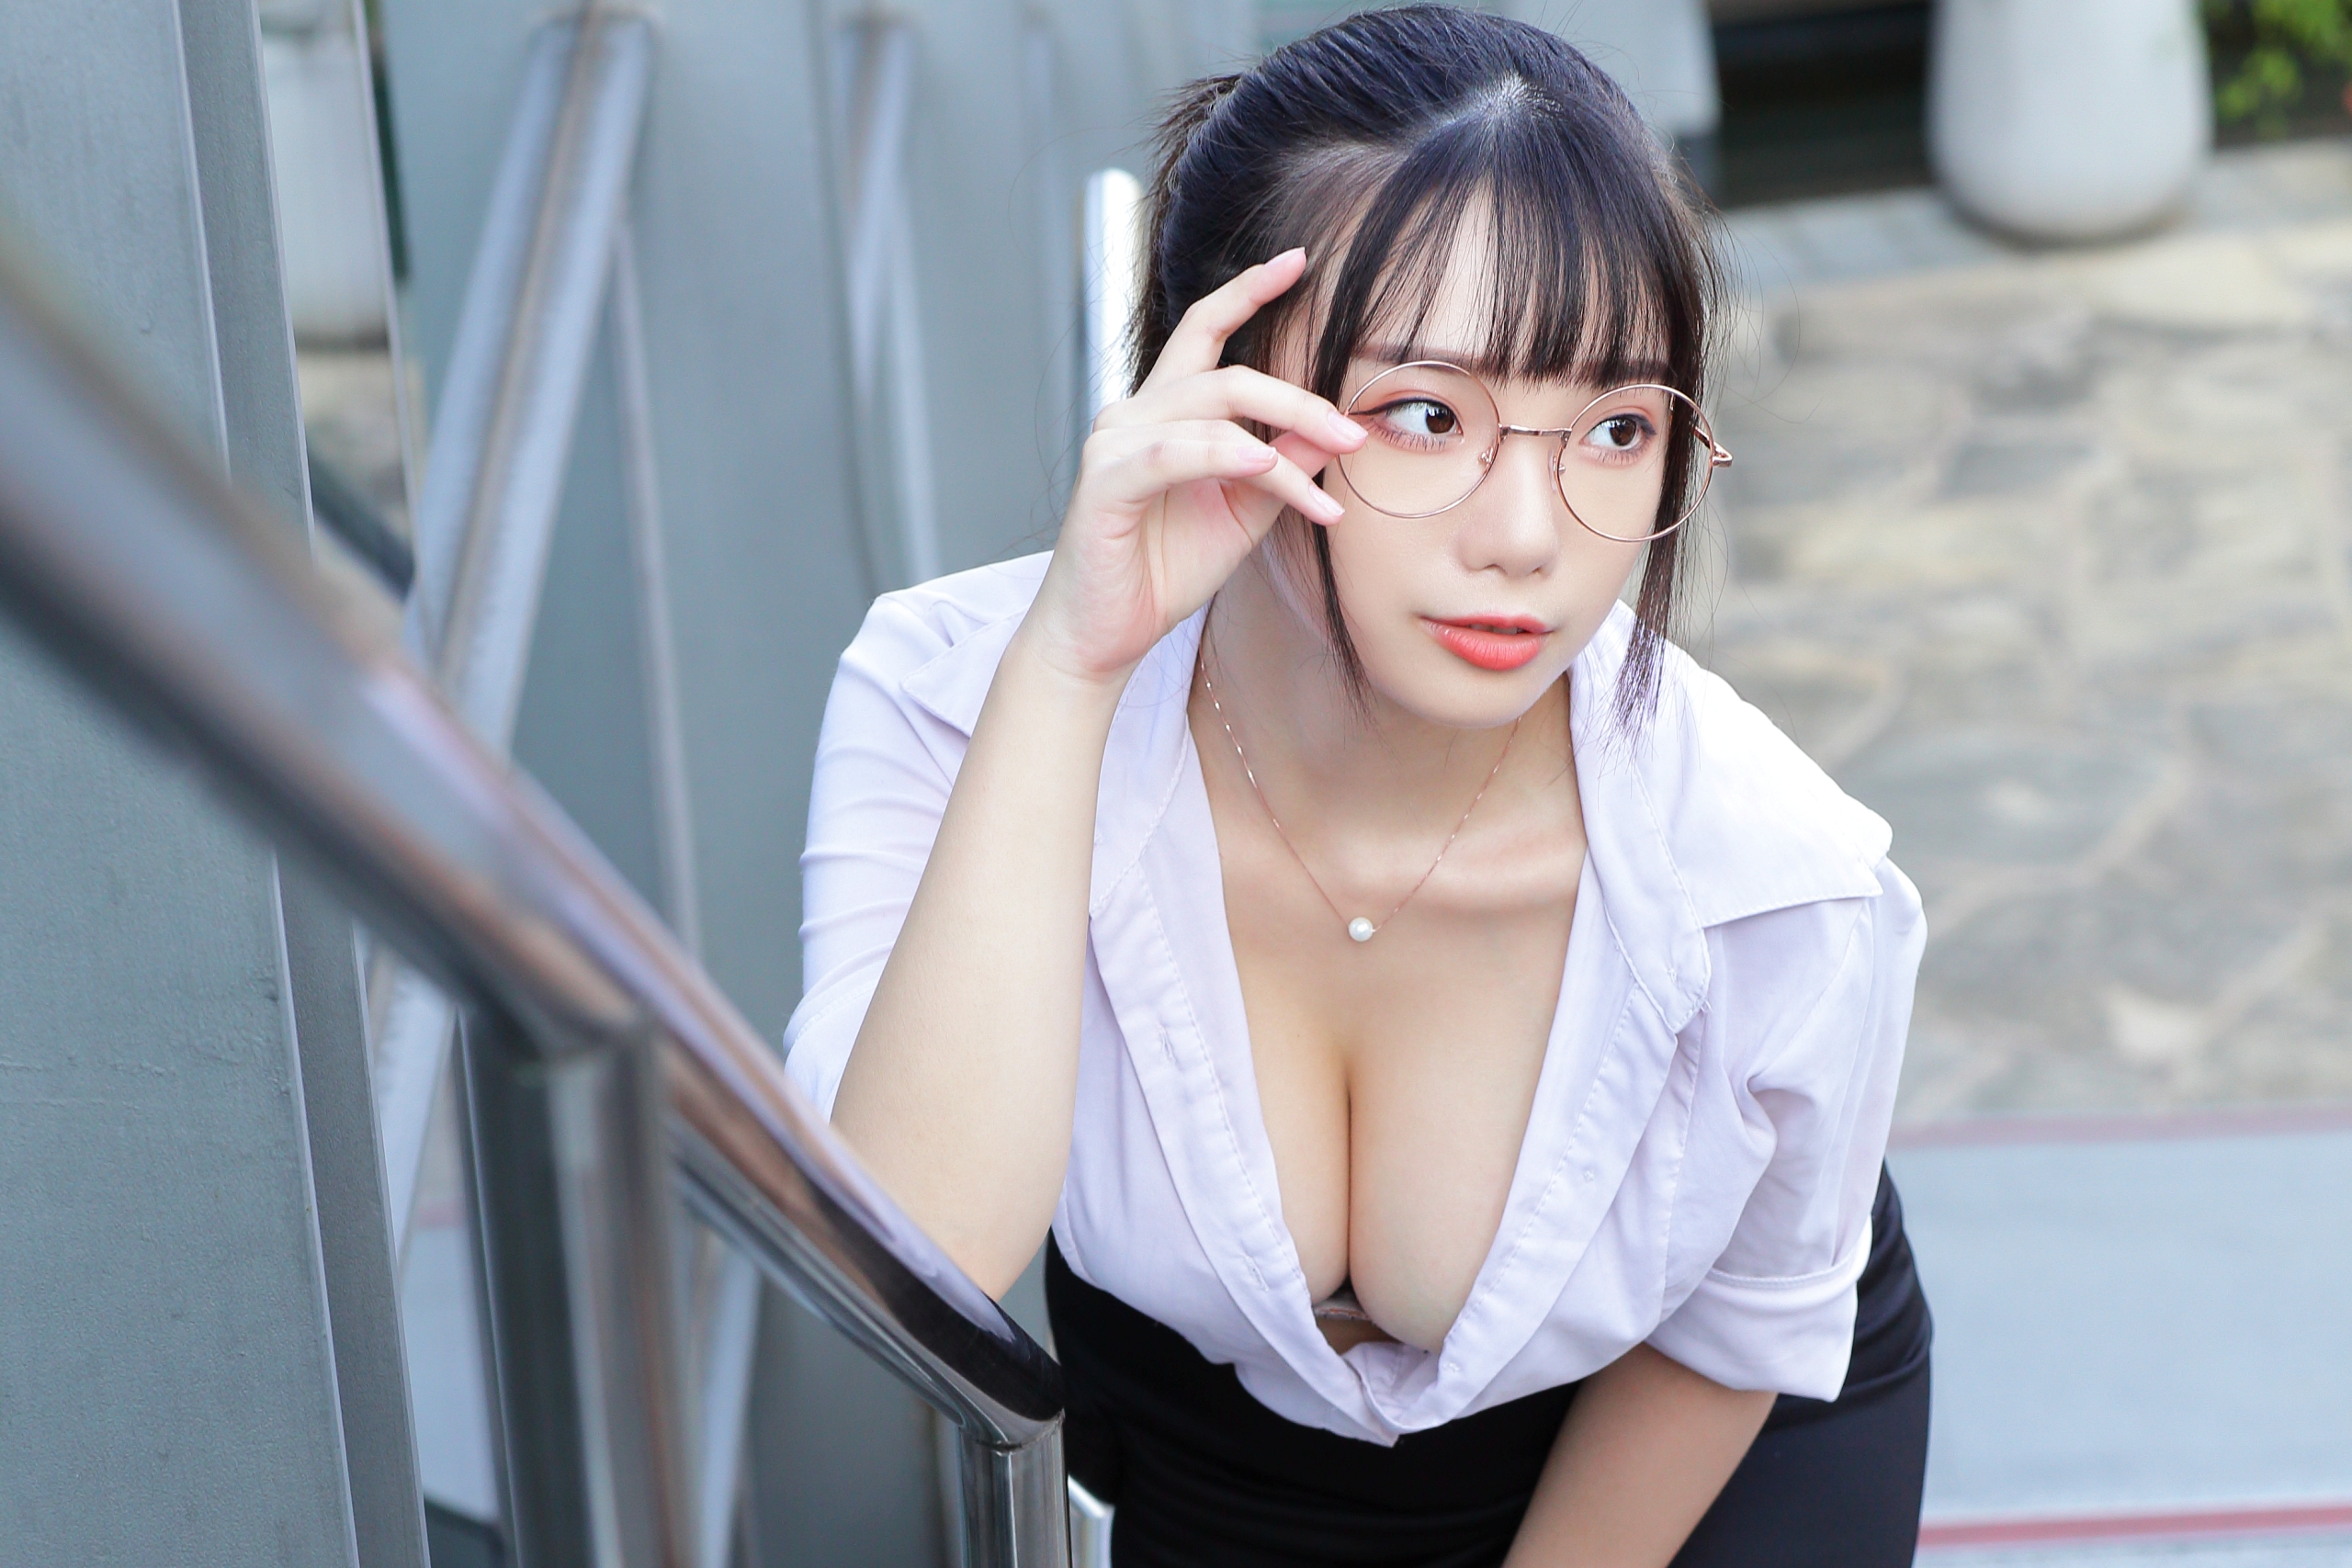 People 2560x1707 Ning Shioulin women model brunette bangs women with glasses glasses portrait brown eyes parted lips necklace cleavage shirt miniskirt office girl depth of field railing outdoors women outdoors cosplay Chinese Asian